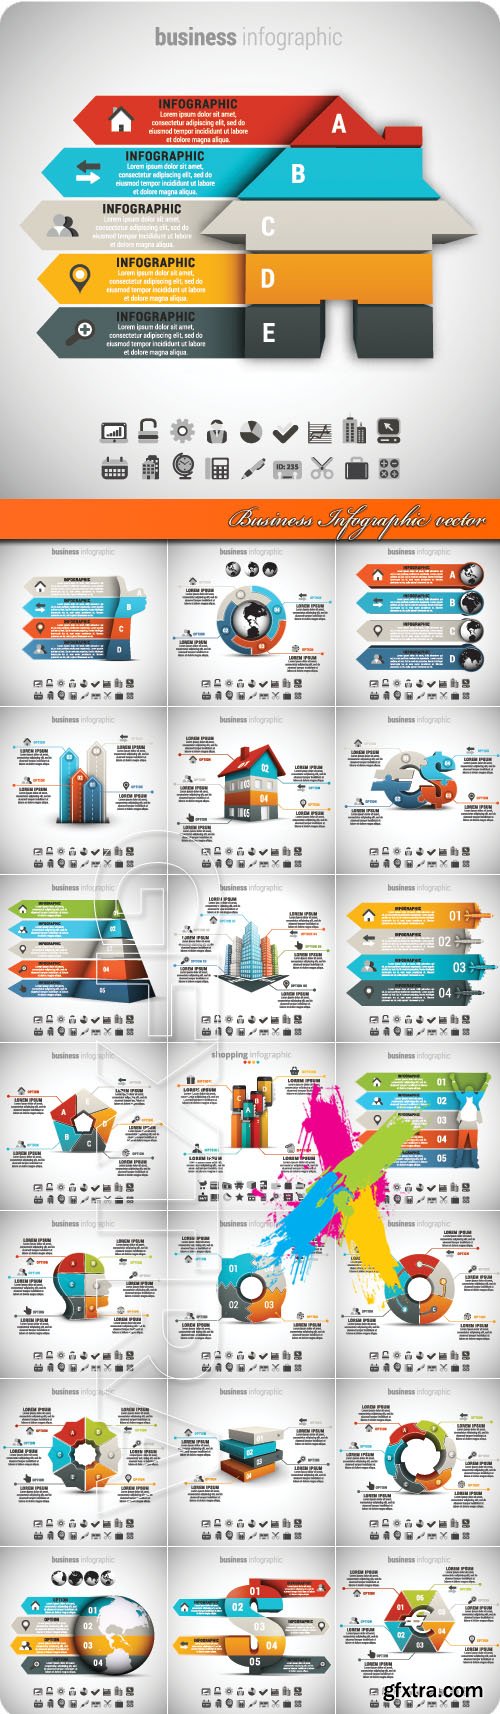 Business Infographic vector